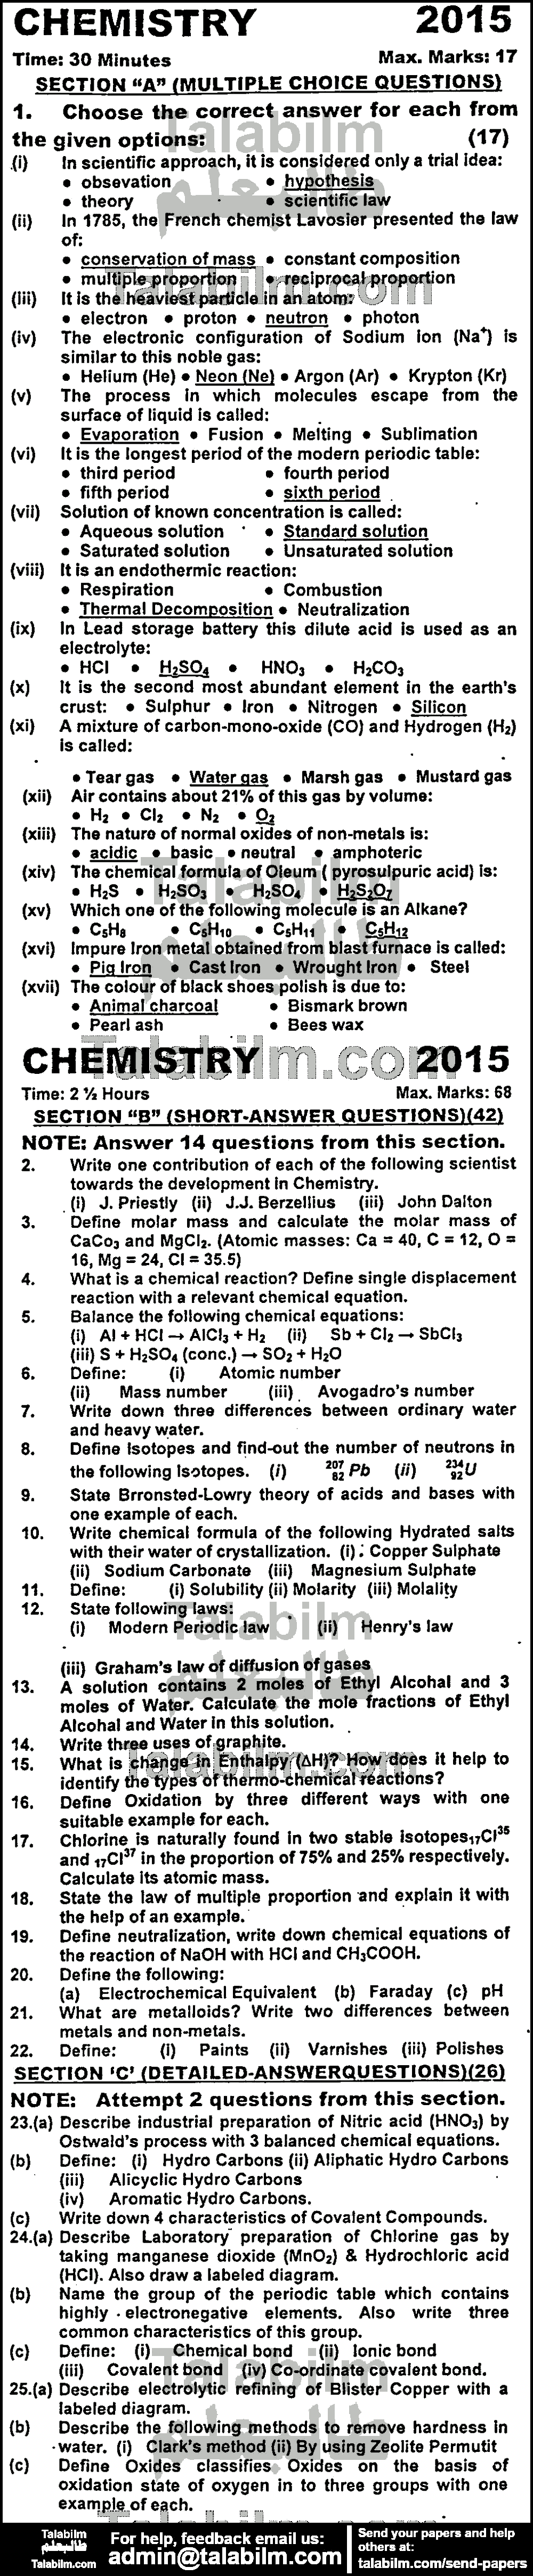 Chemistry 0 past paper for English Medium 2015 Group-I